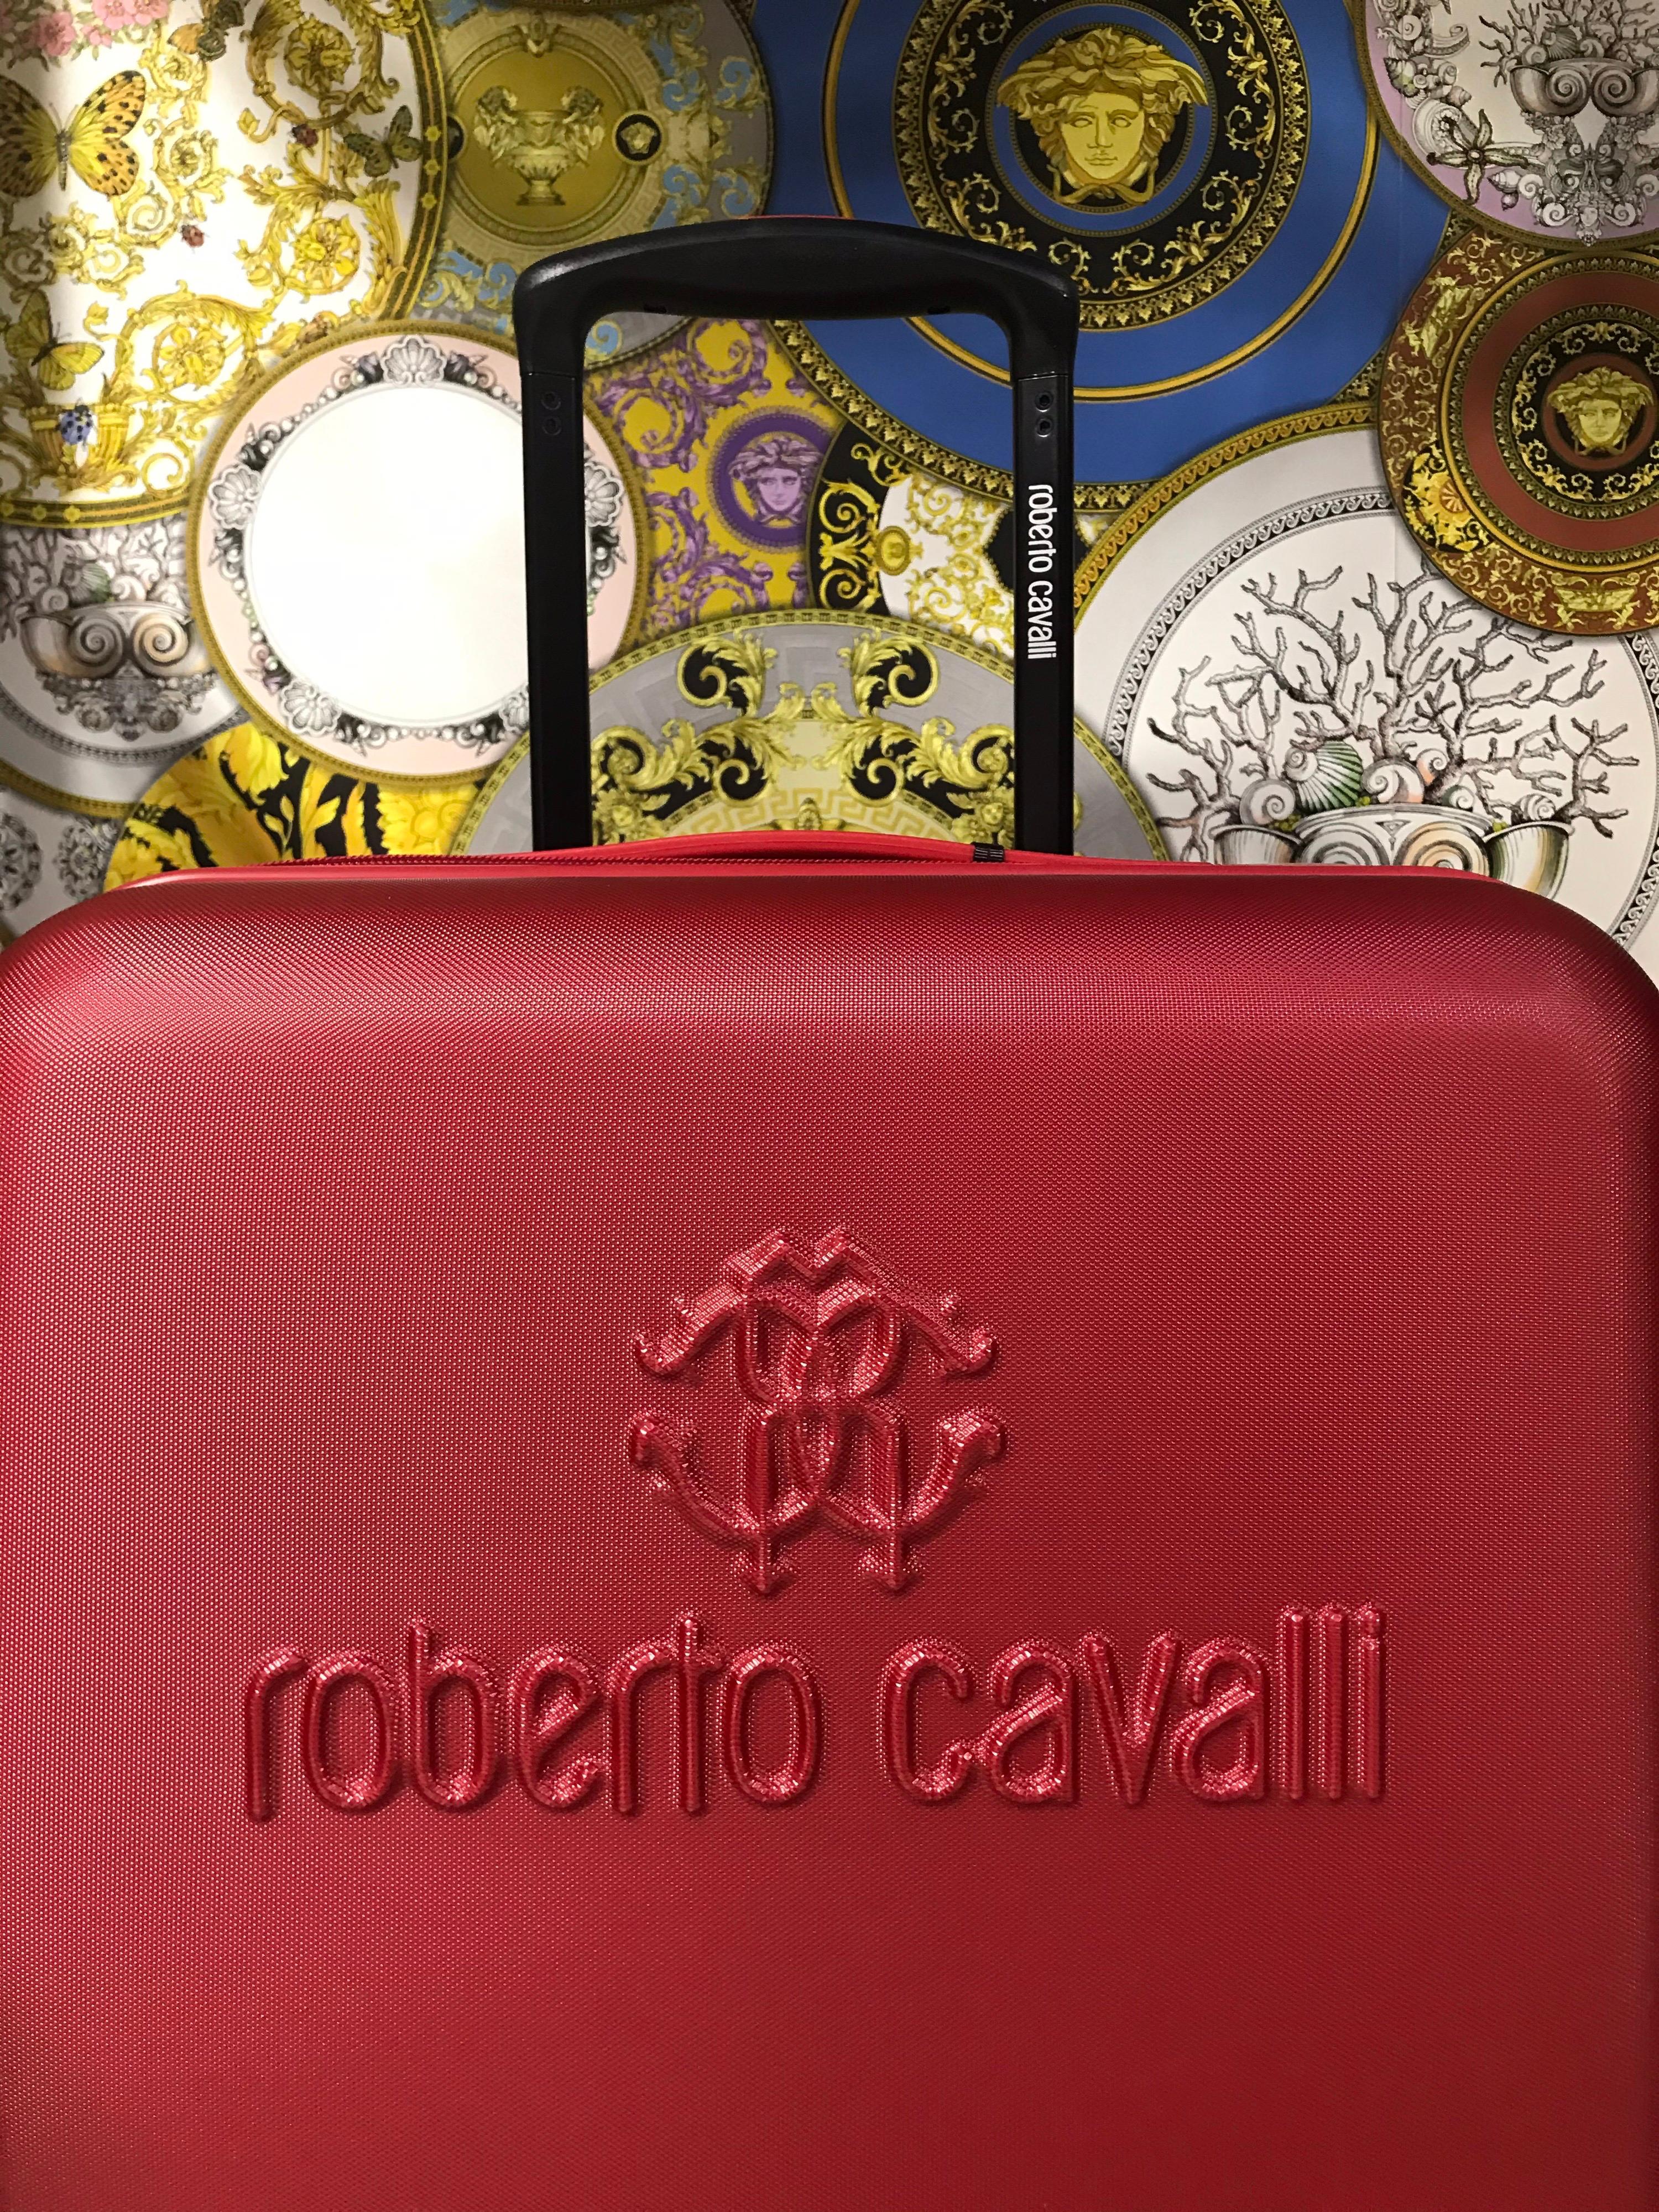 Roberto Cavalli

Logo Hardshell Suitcase in Red


Iconic logo adds a luxurious flourish to this streamlined suitcase.

Top handle
Zip-around closure
Silvertone hardware
Side lock
Four-wheel system
One inside zip compartment
One inside ticket